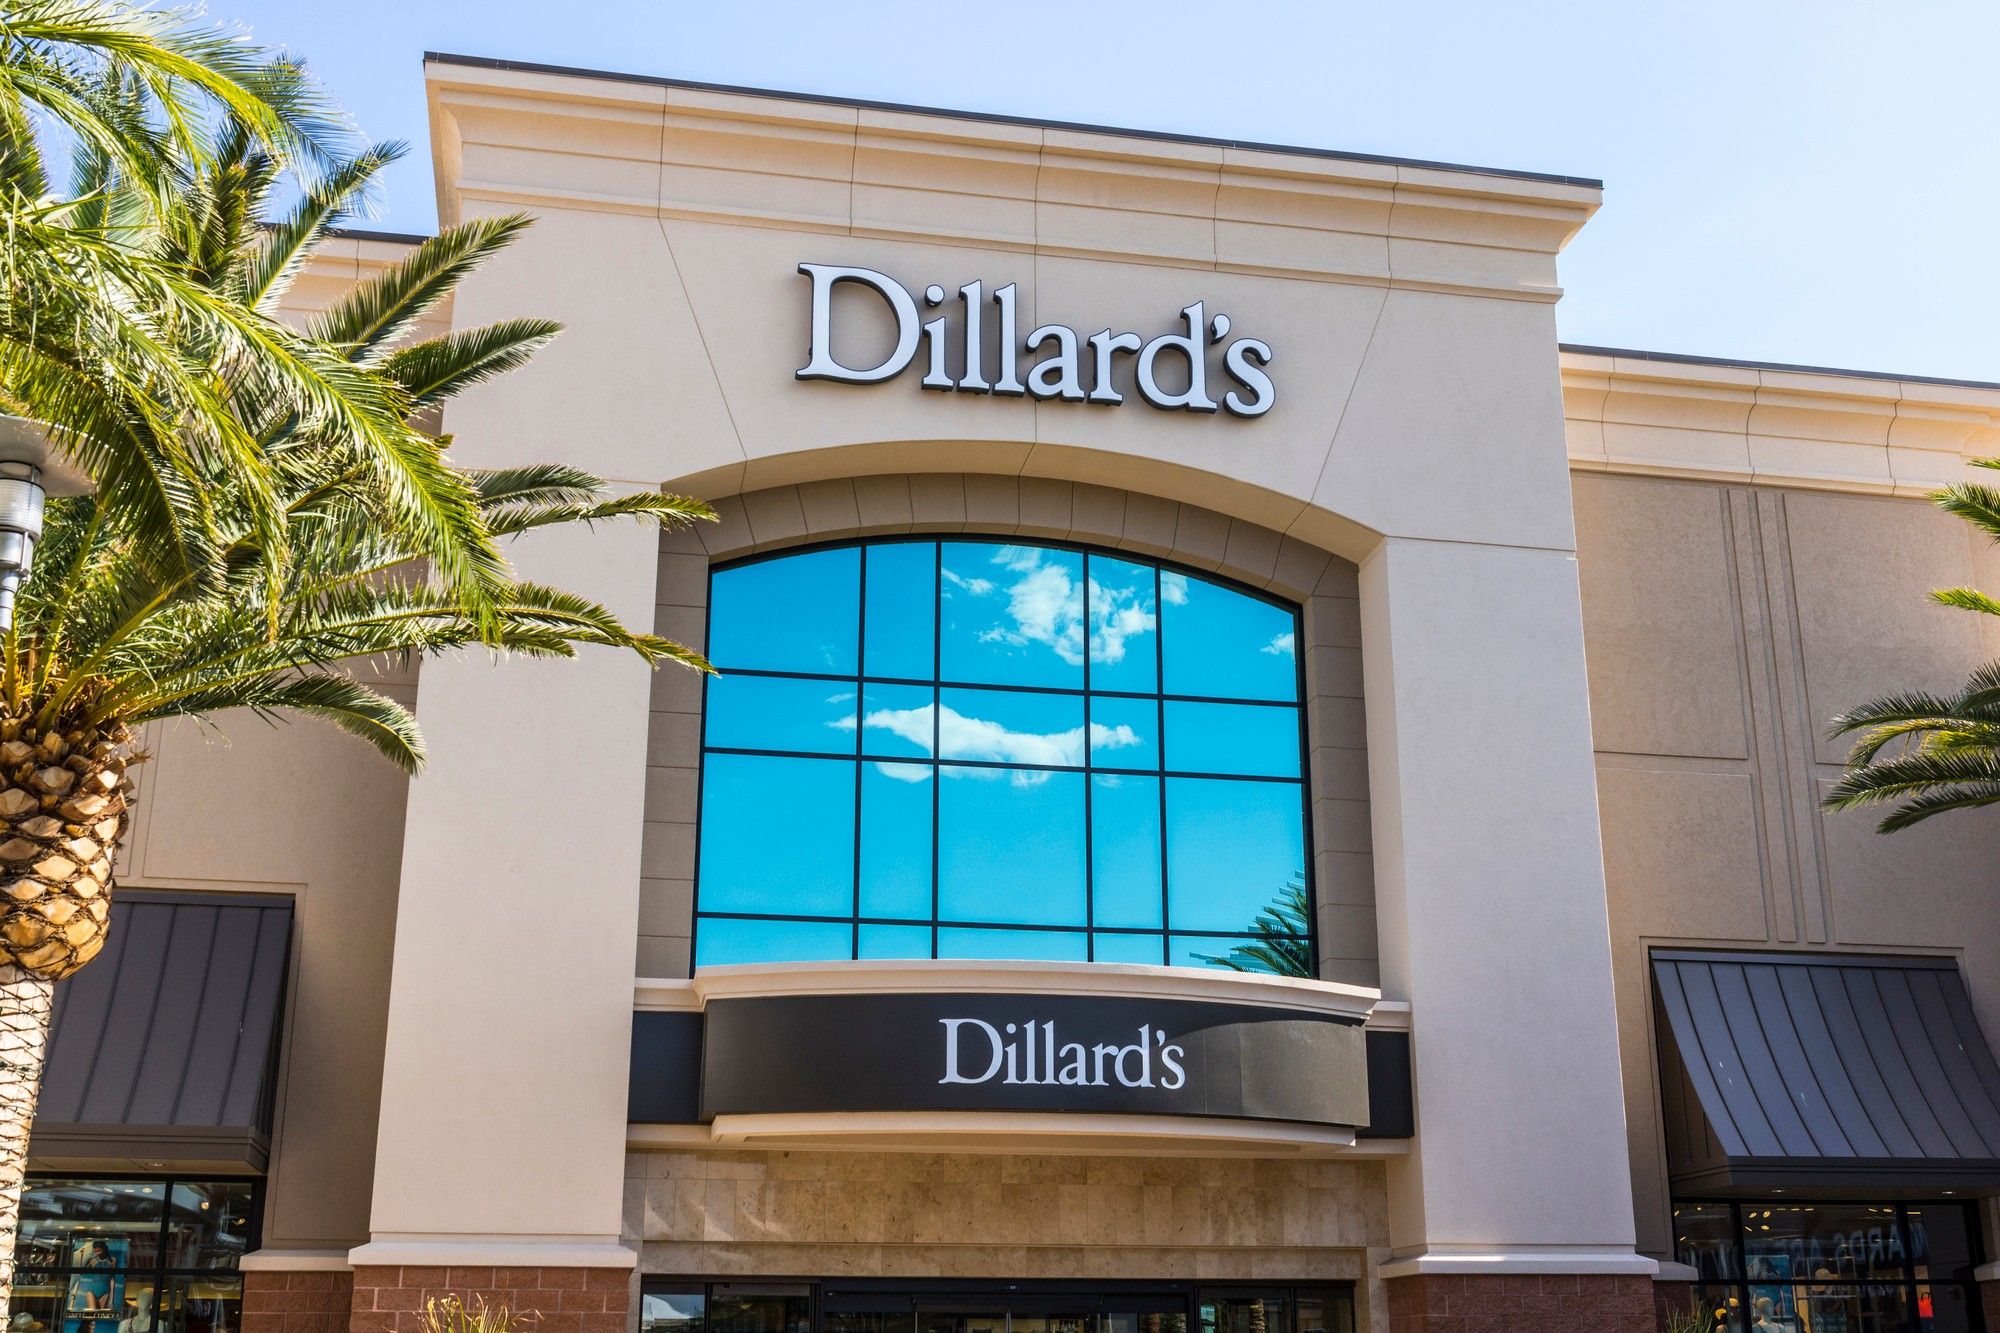 Dillard's has settled over racial bias in their employment practices.